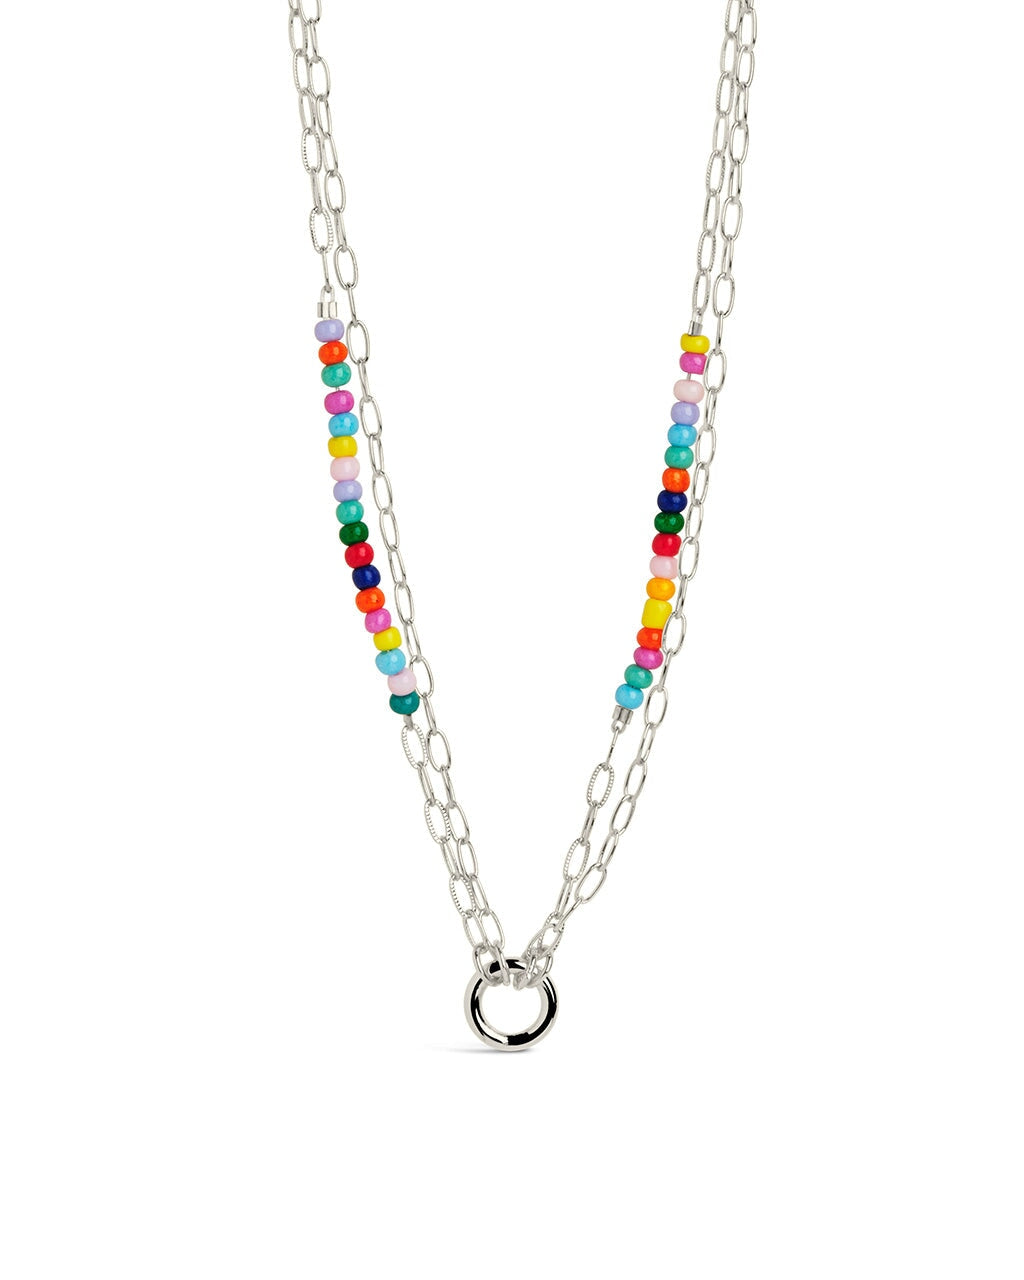 2022 Fashion Trends, Beaded Necklaces, Colorful Layering Necklaces, Seed  Bead Pearl Necklace